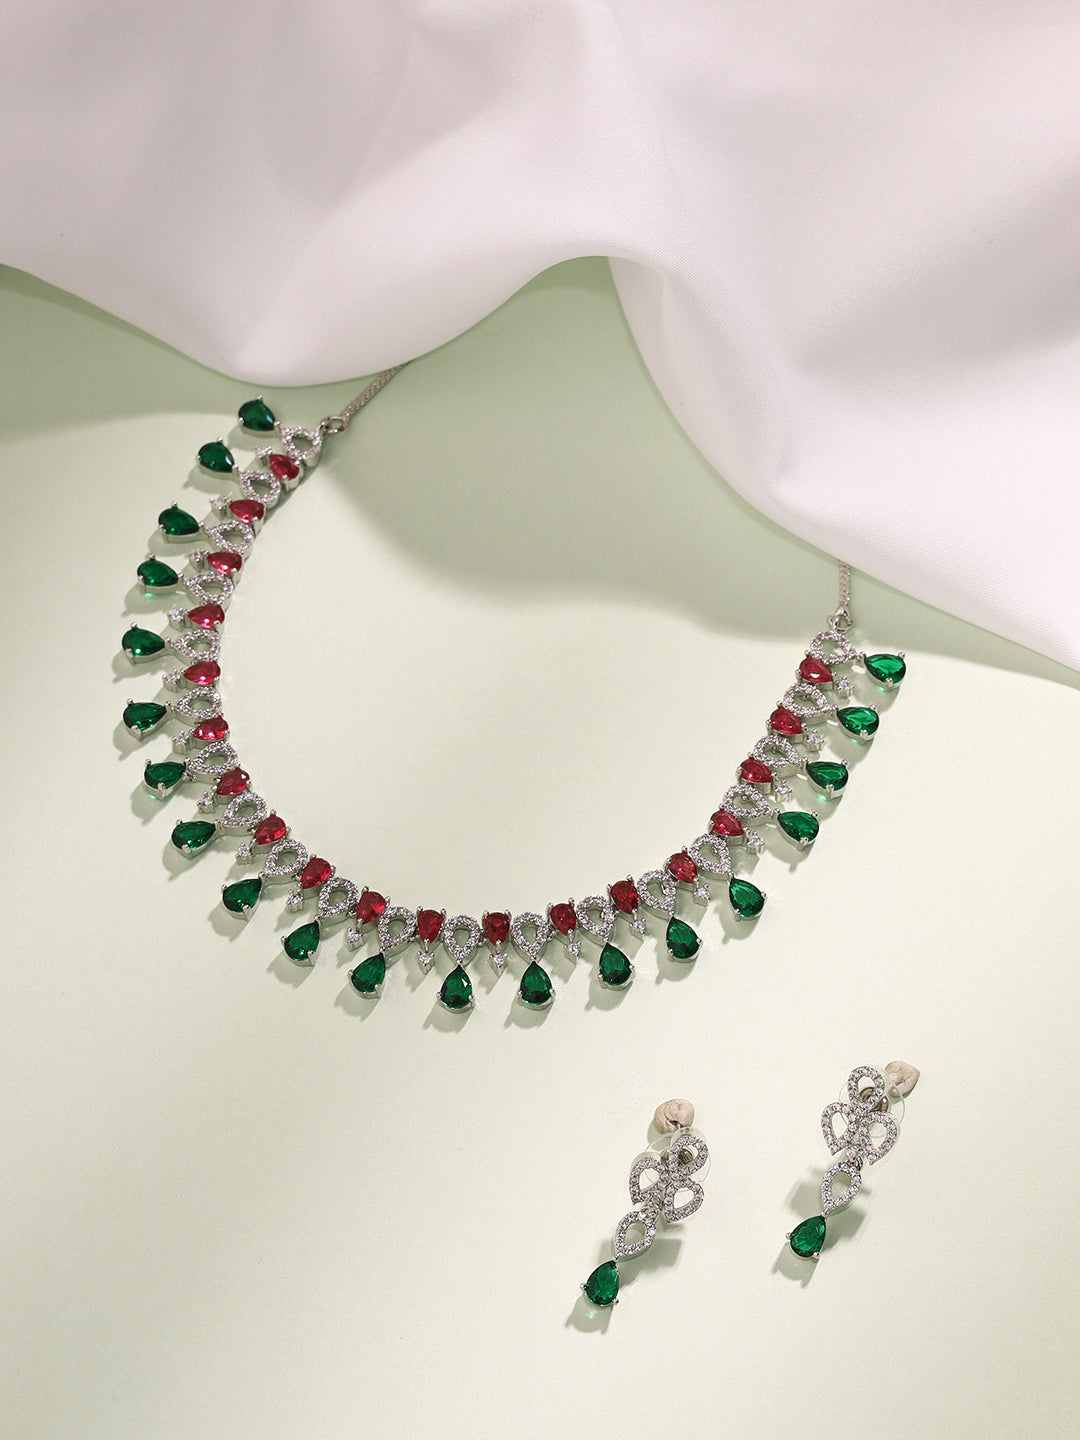 Priyaasi American Diamond Jewellery Set with Silver Plating and Charming Stones